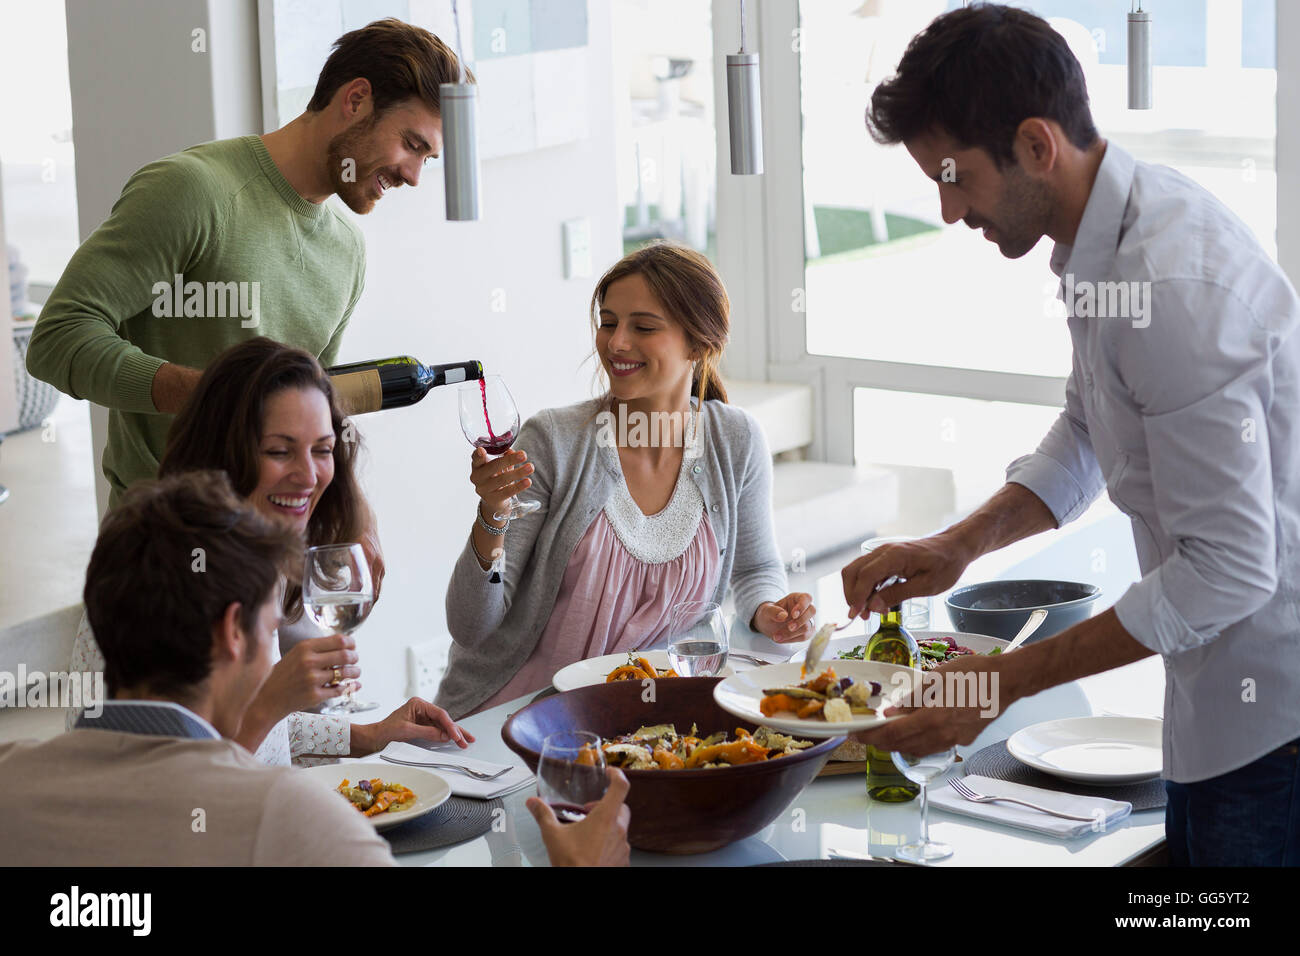 Man serving food to his friends at dining table Stock Photo